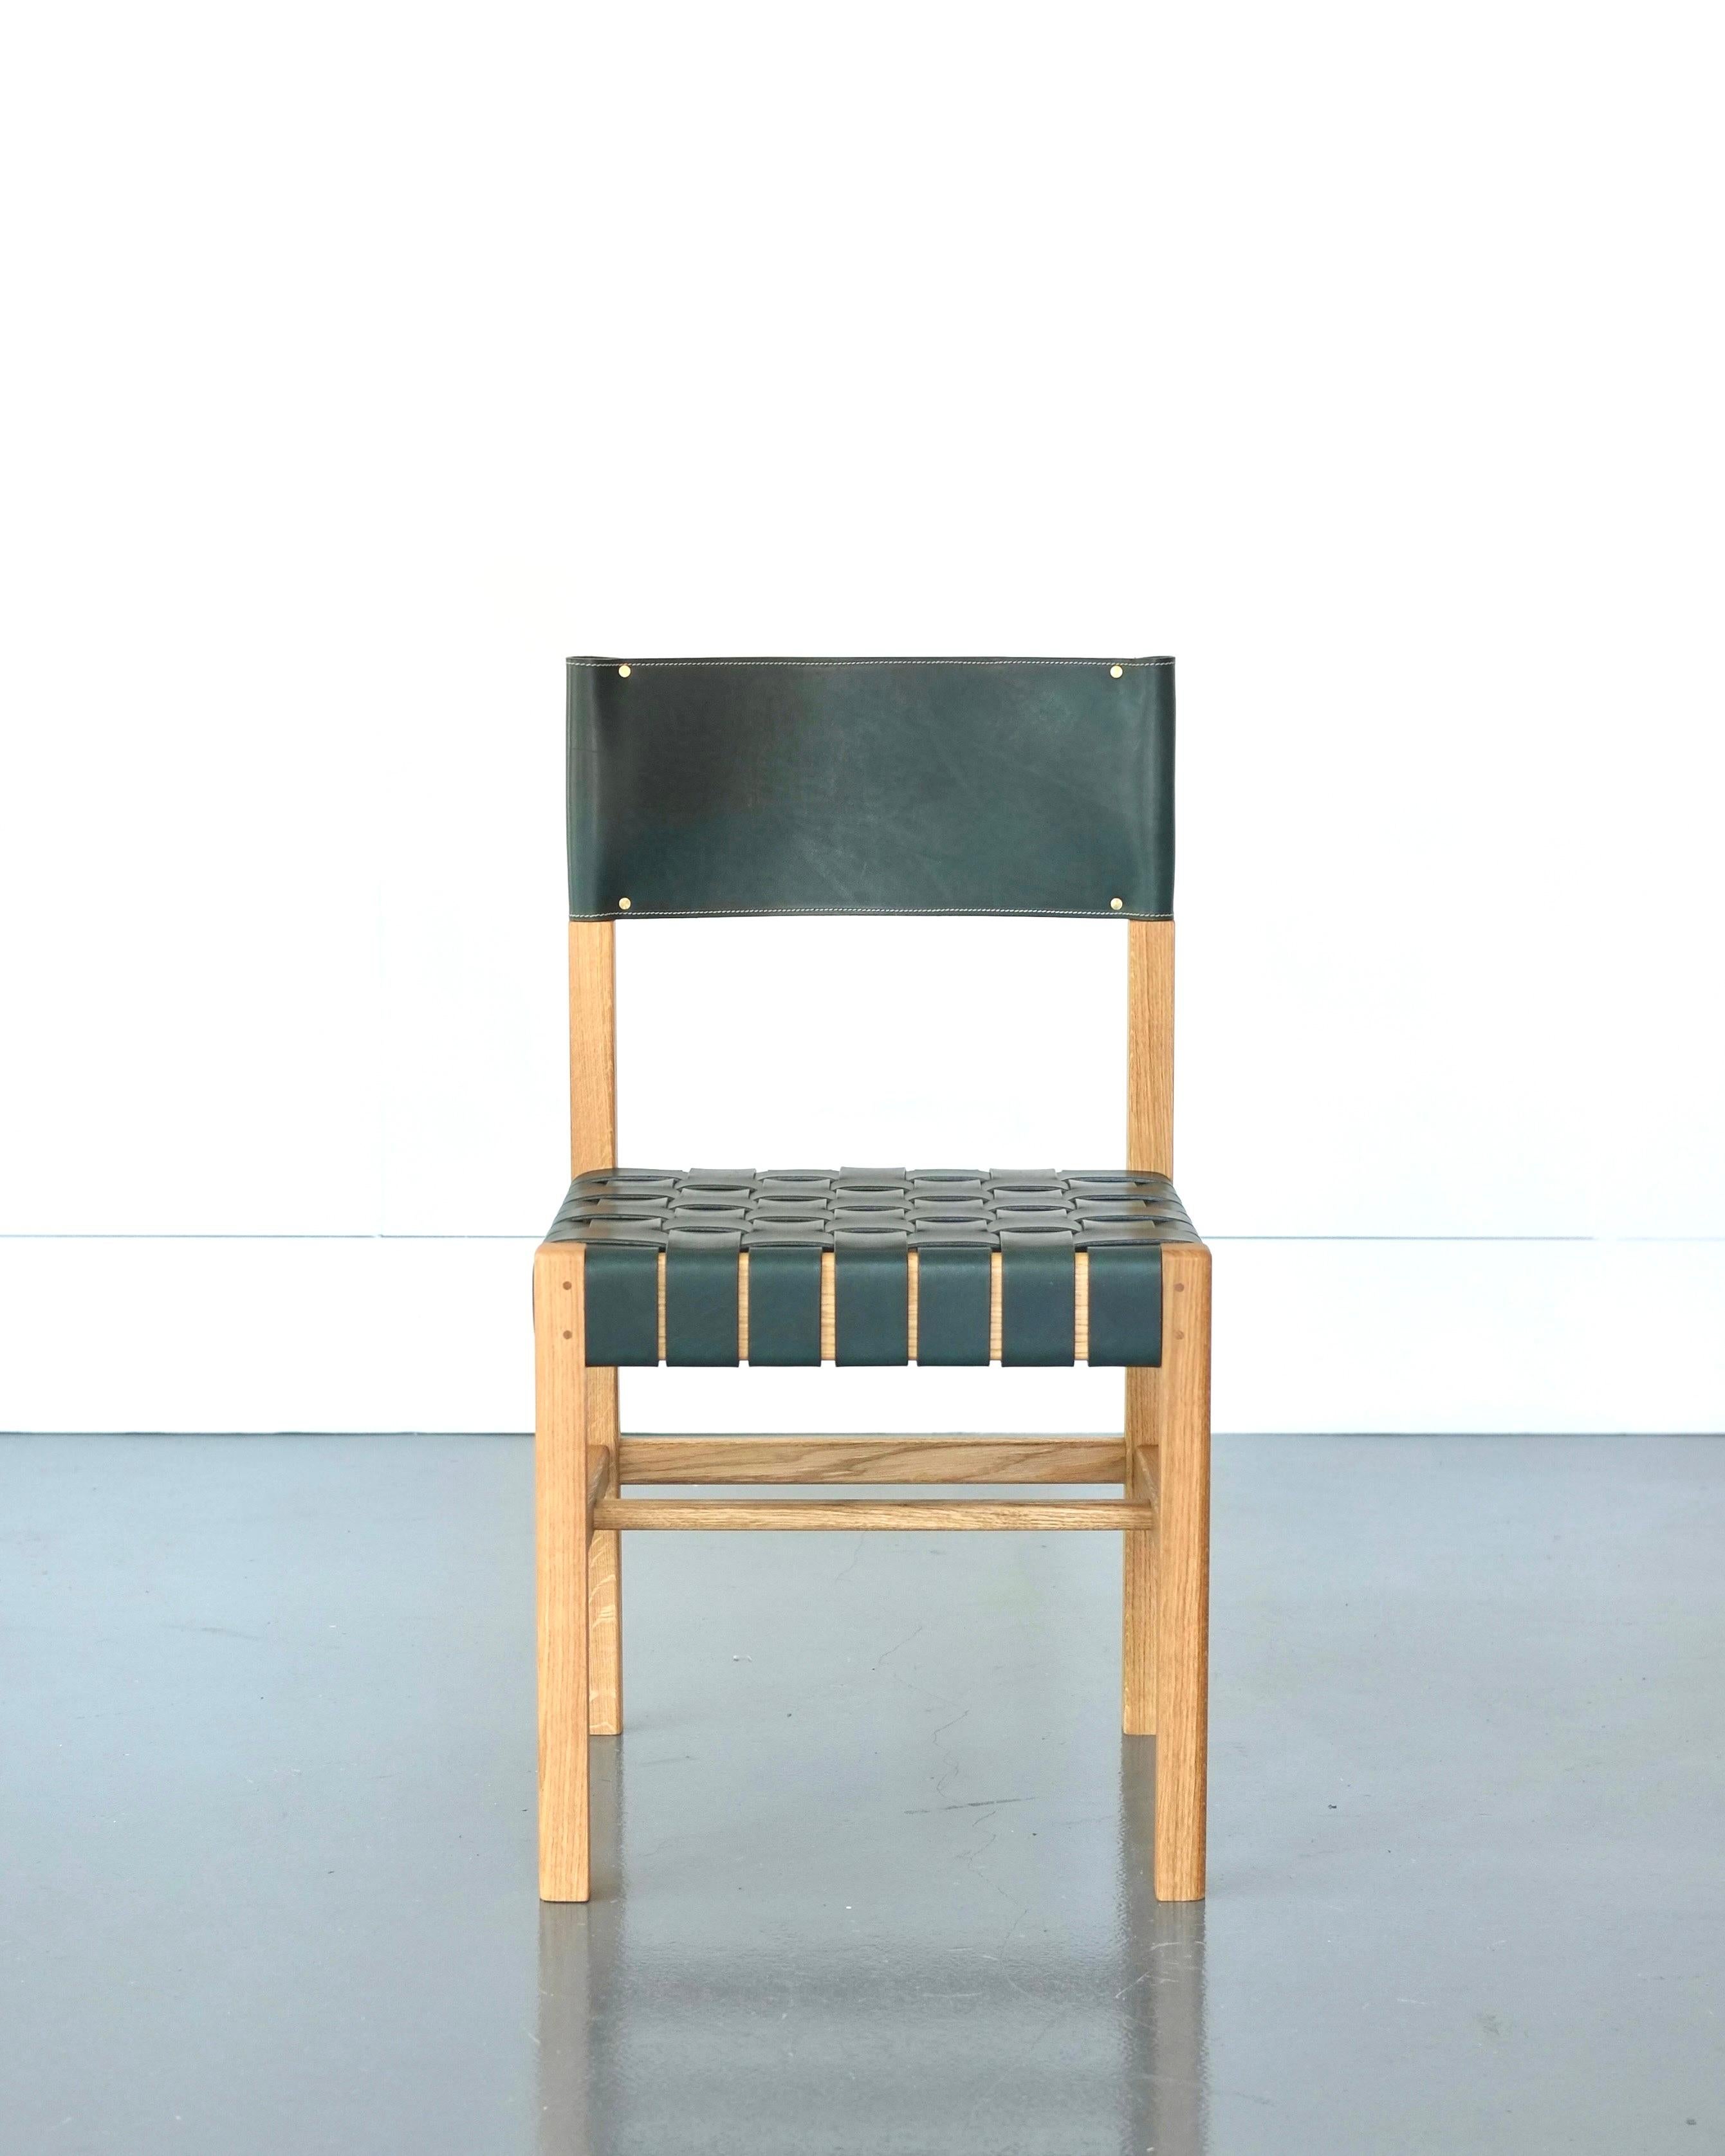 Inspired by the utilitarian and timeless minimalism of the Shaker tradition, the Cinch dining or occasional chair fuses traditional timber frame joinery and classic leather working techniques. Hand turned back legs and pinned tenon joints are paired